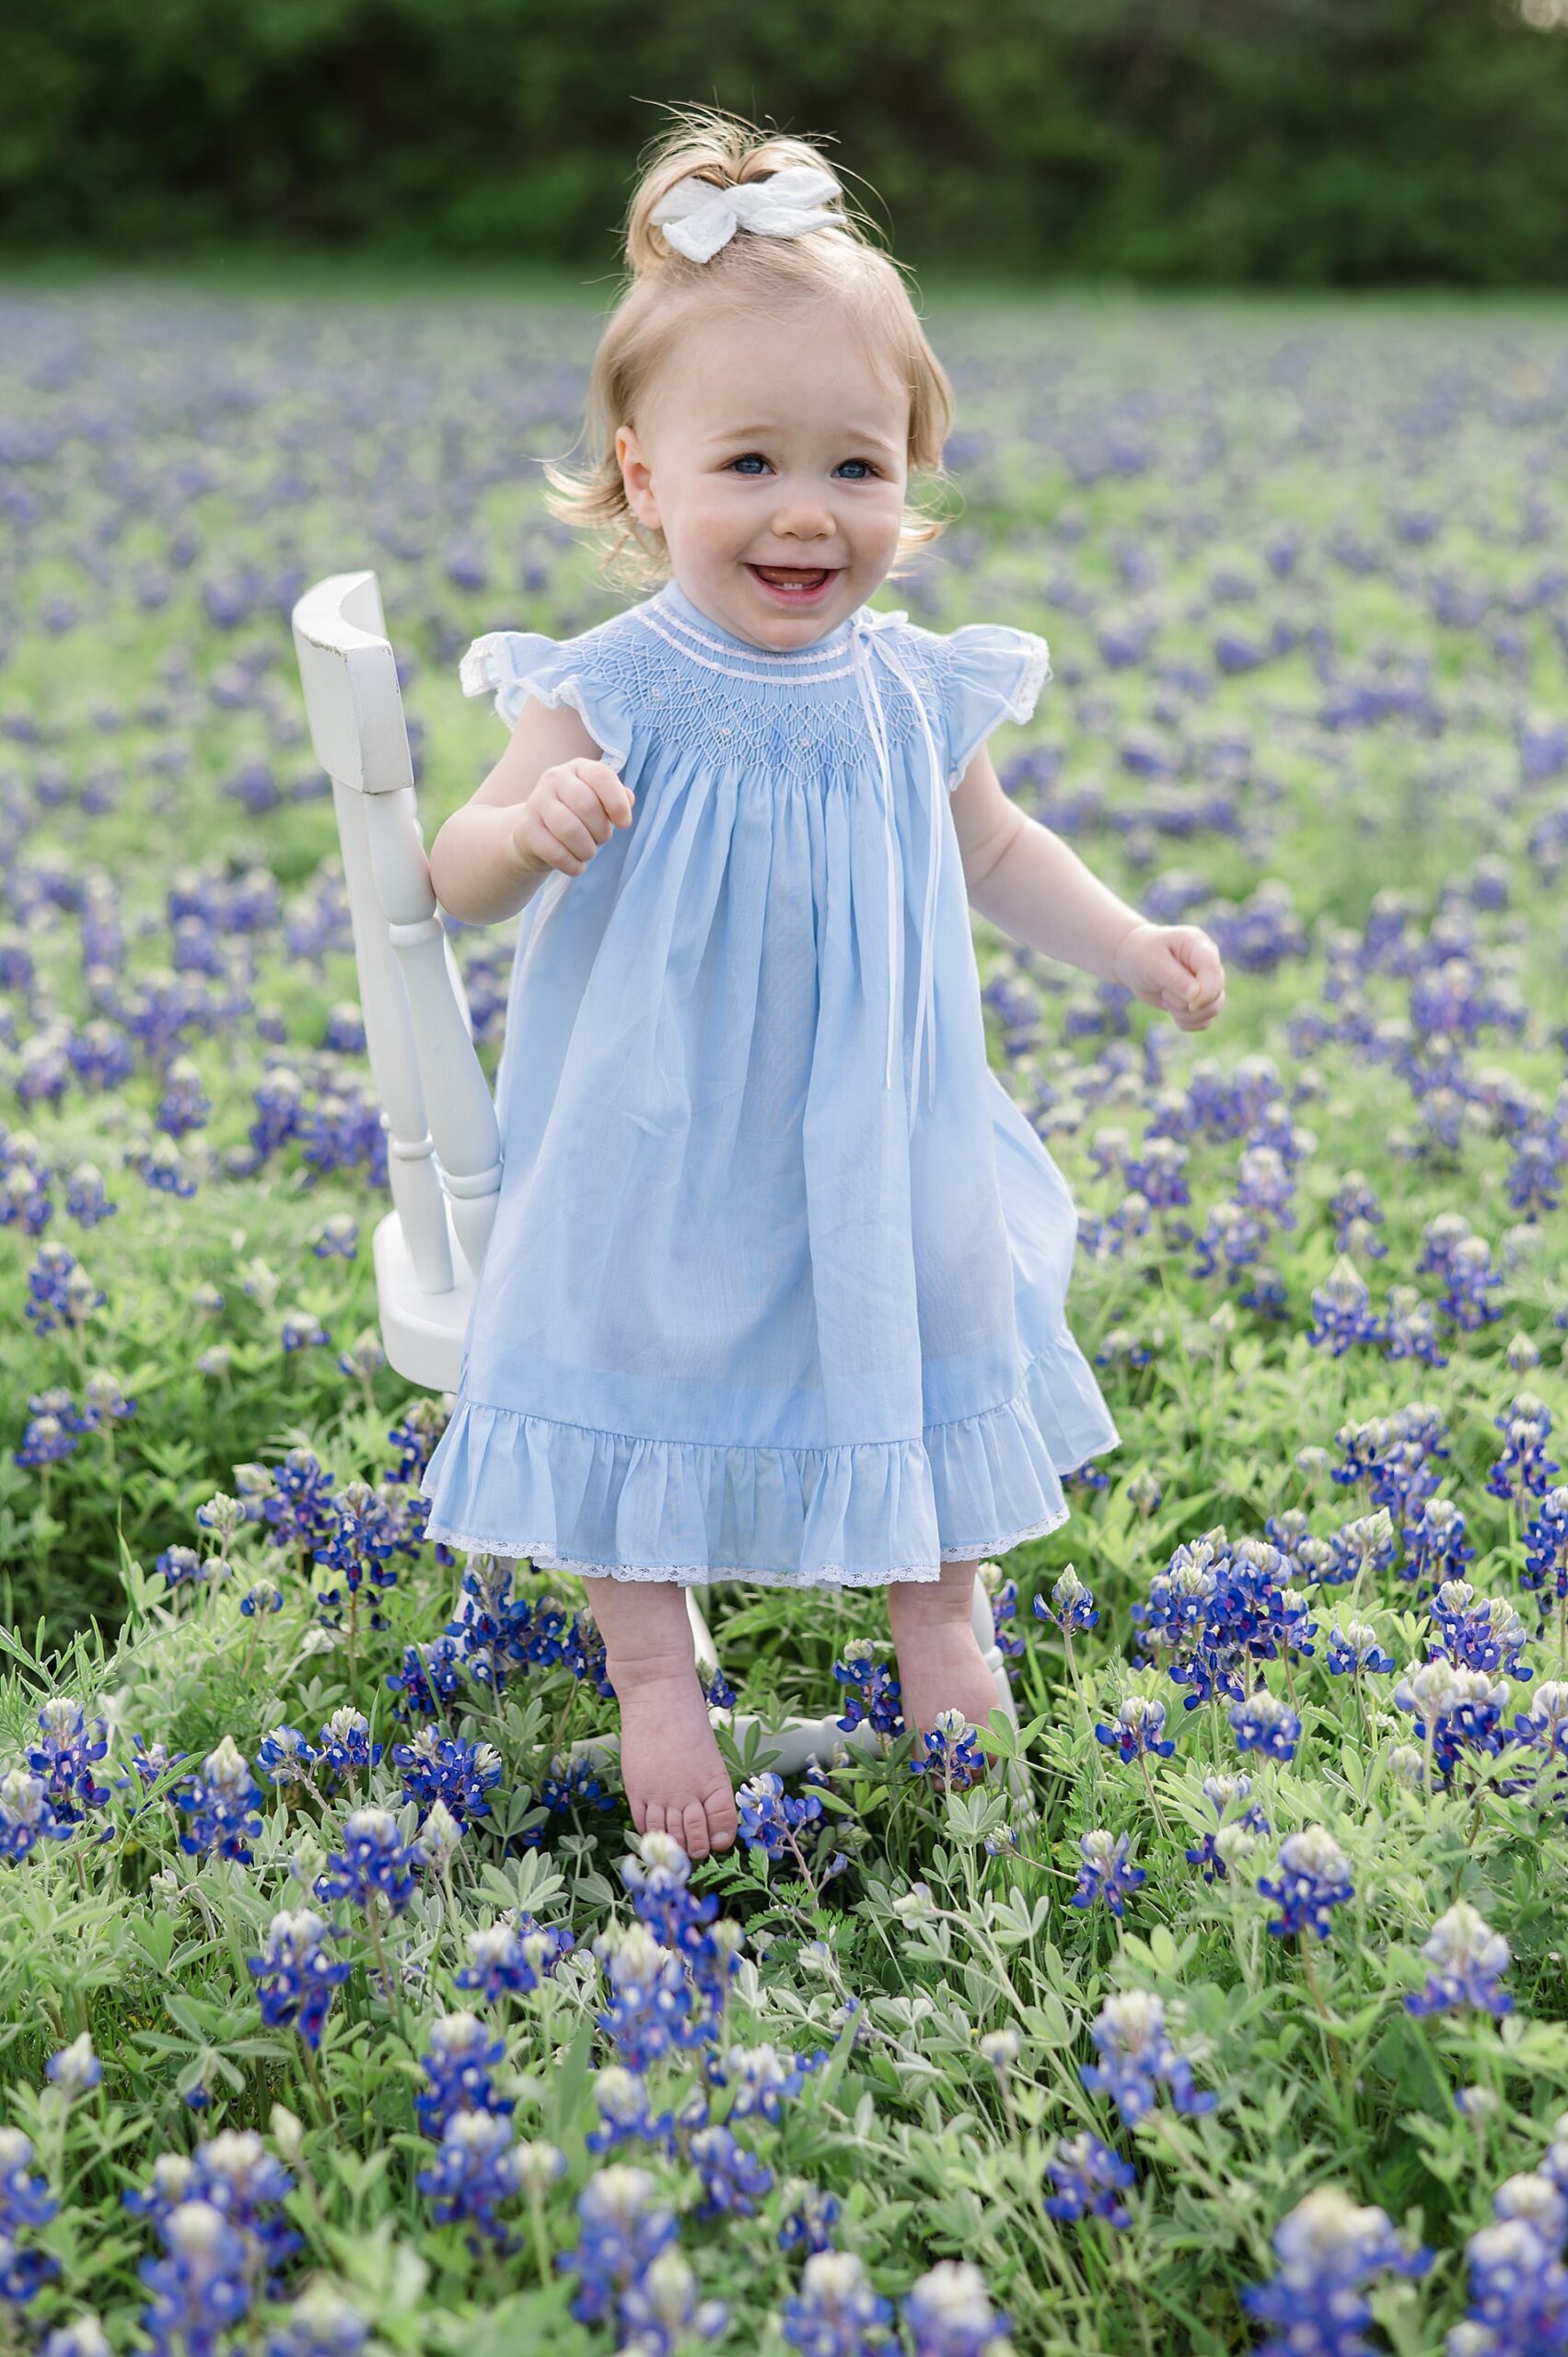 candid portraits of little girl in Dallas Texas field of Bluebonnet  photographed by Lindsey Dutton Photography, a Dallas family photographer